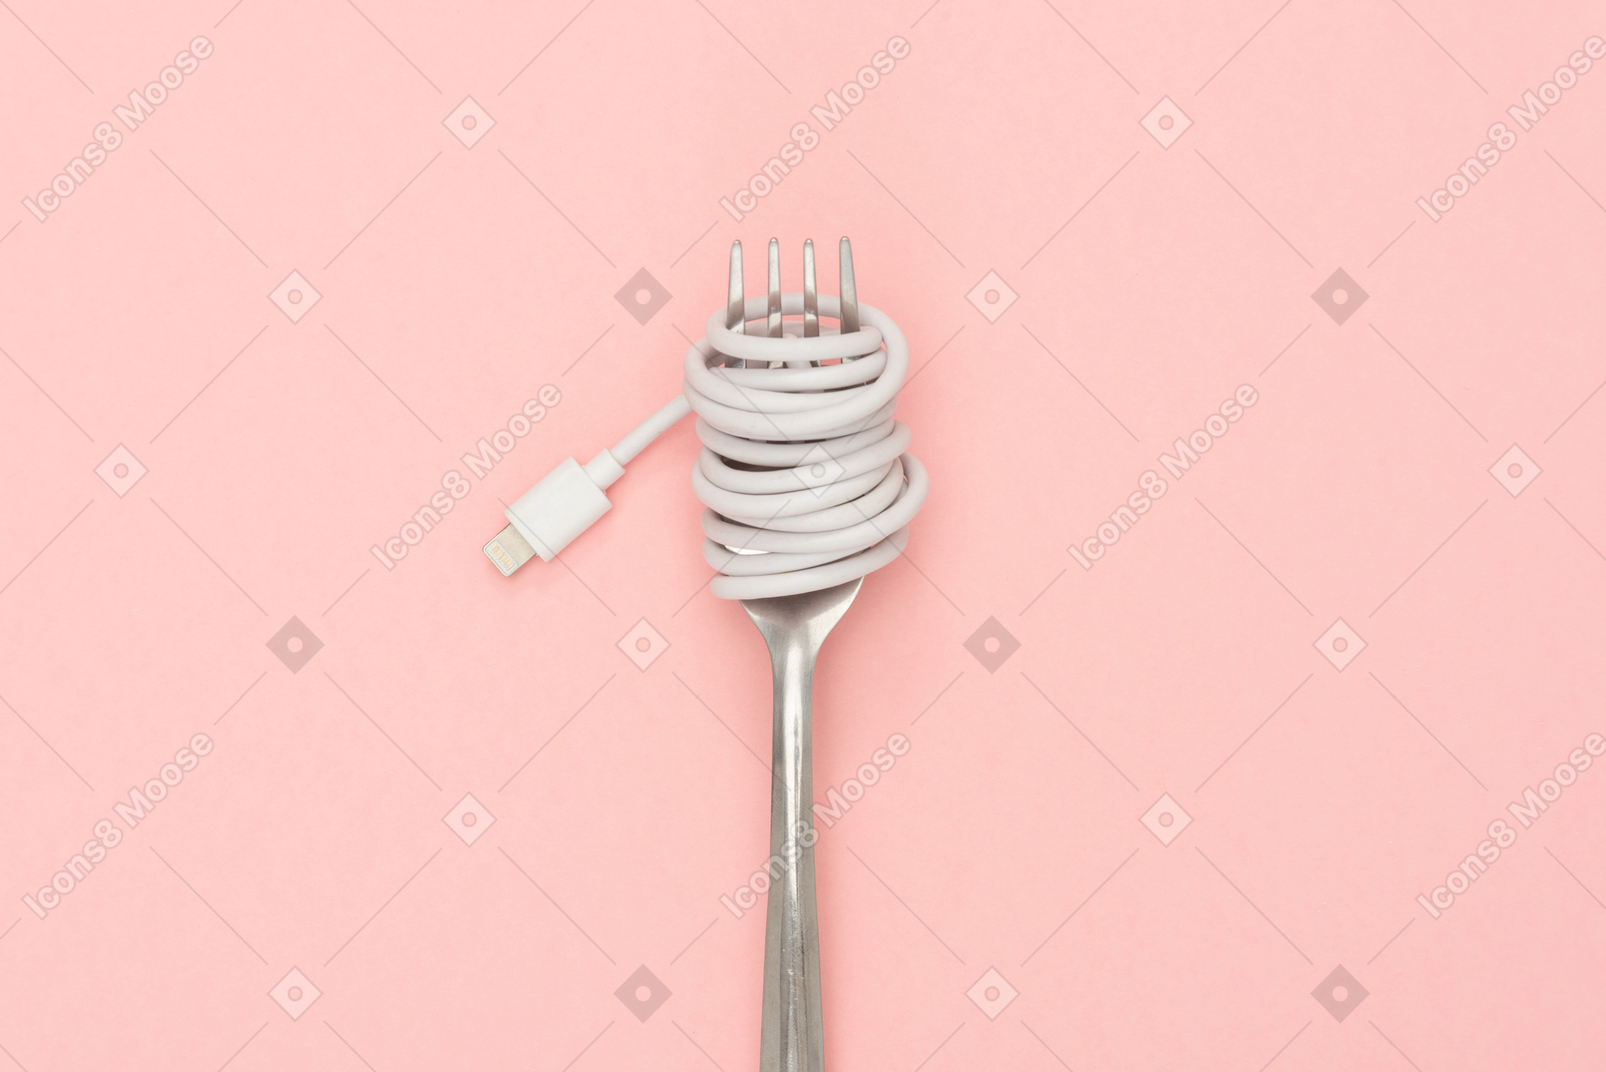 Charger cable wrapped around a fork